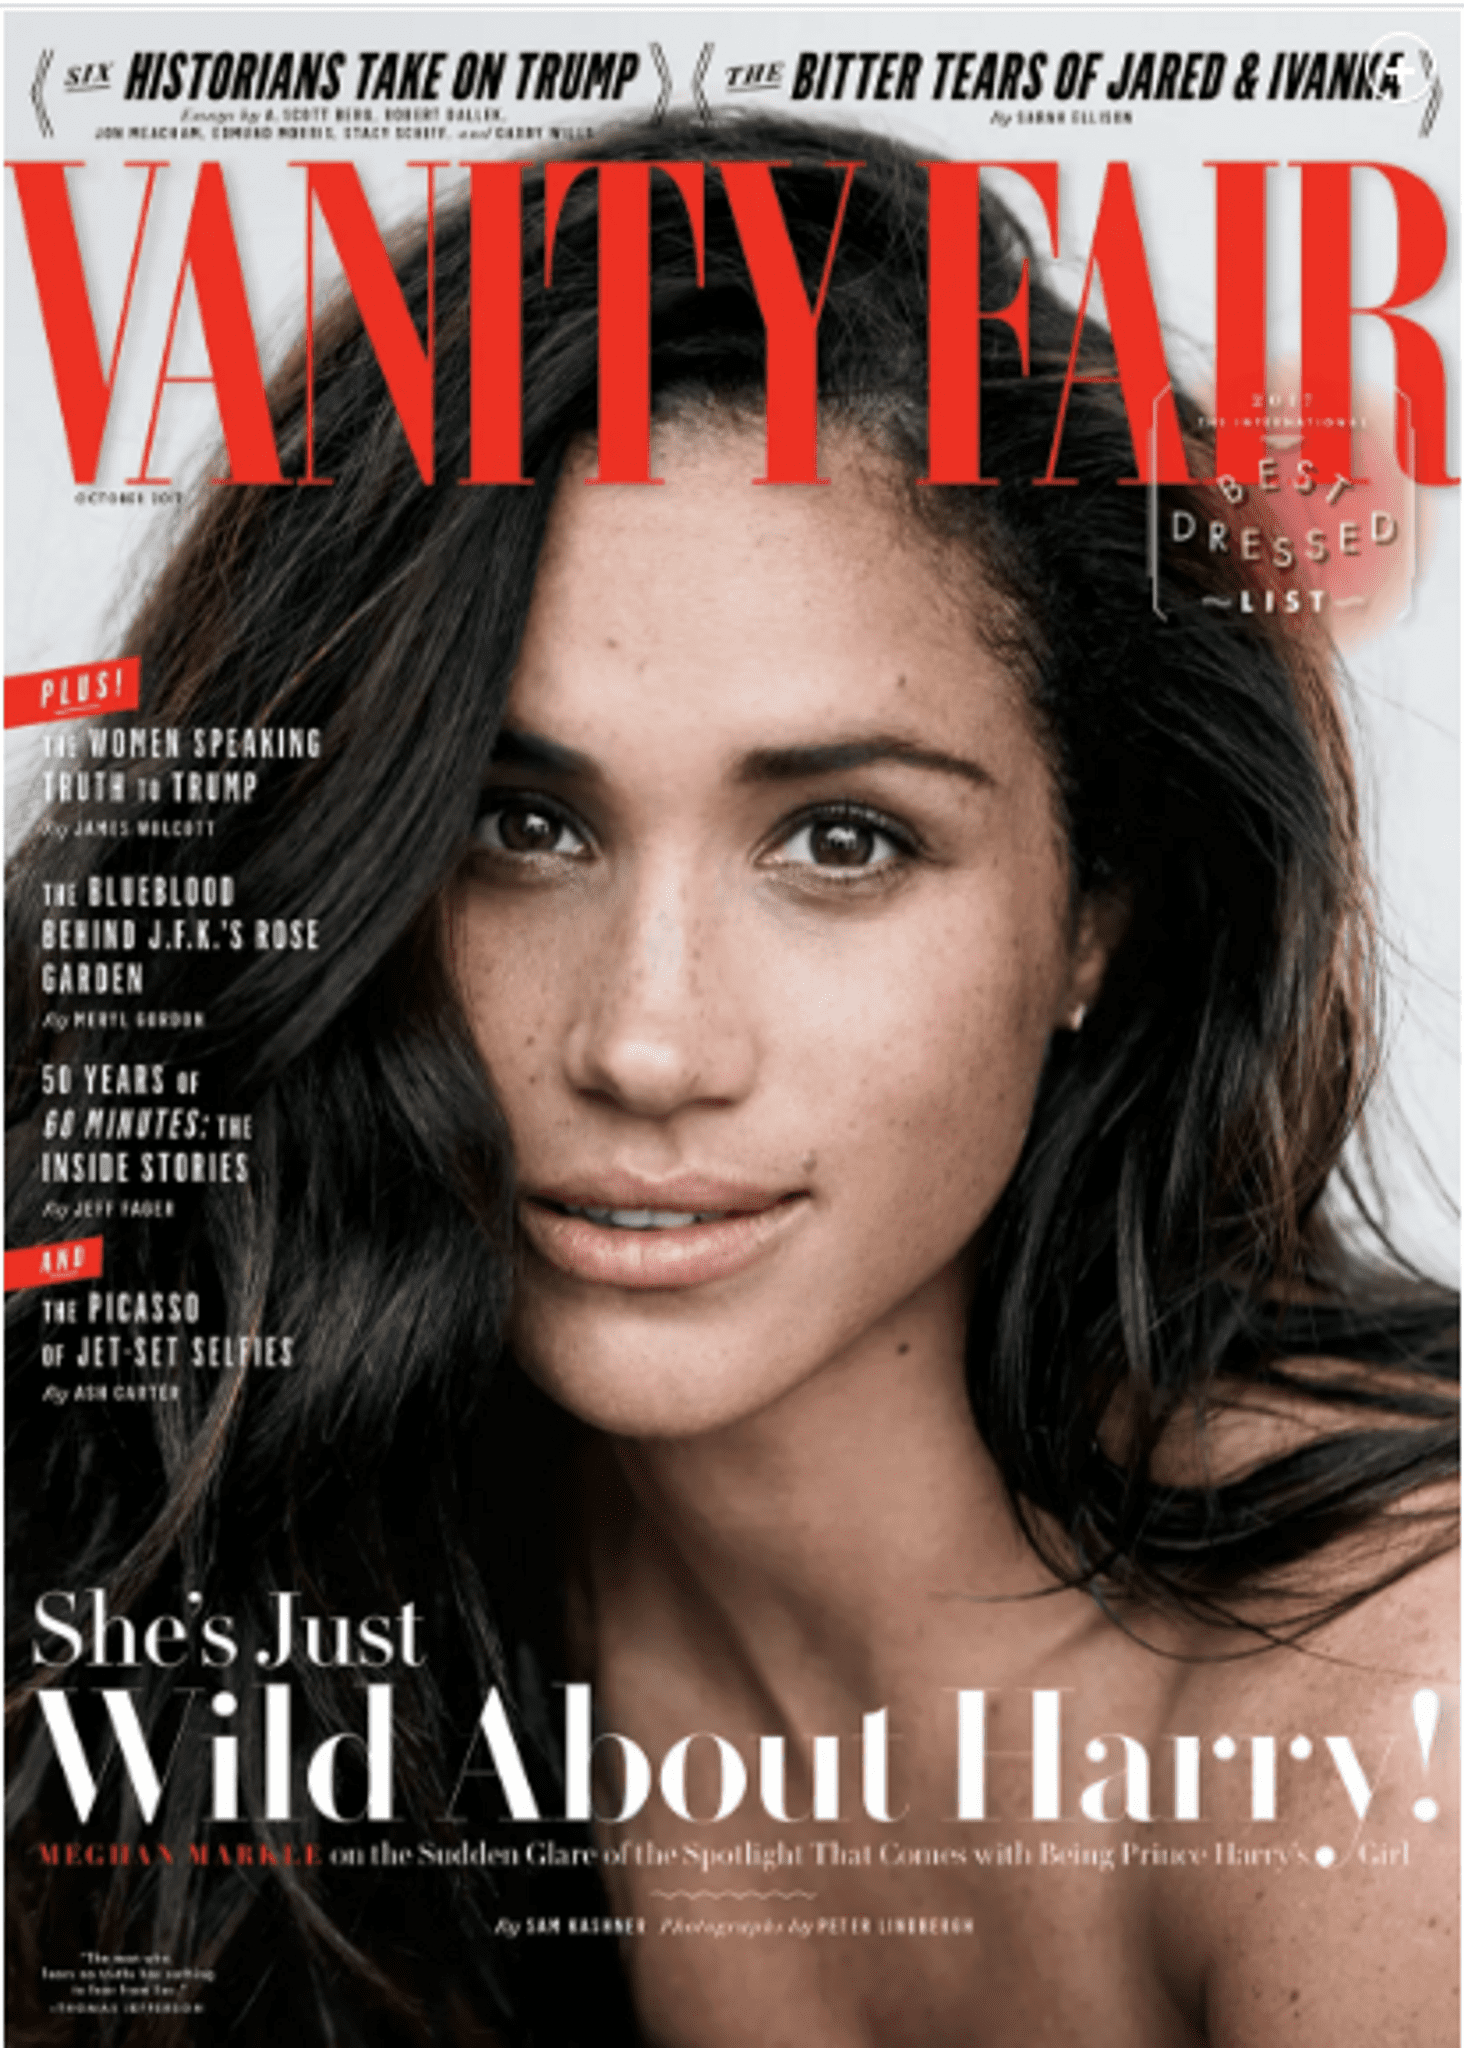 The Vanity Fair Magazine Cover That Revealed Meghan Markle's Romance With Prince Harry Infuriated Her